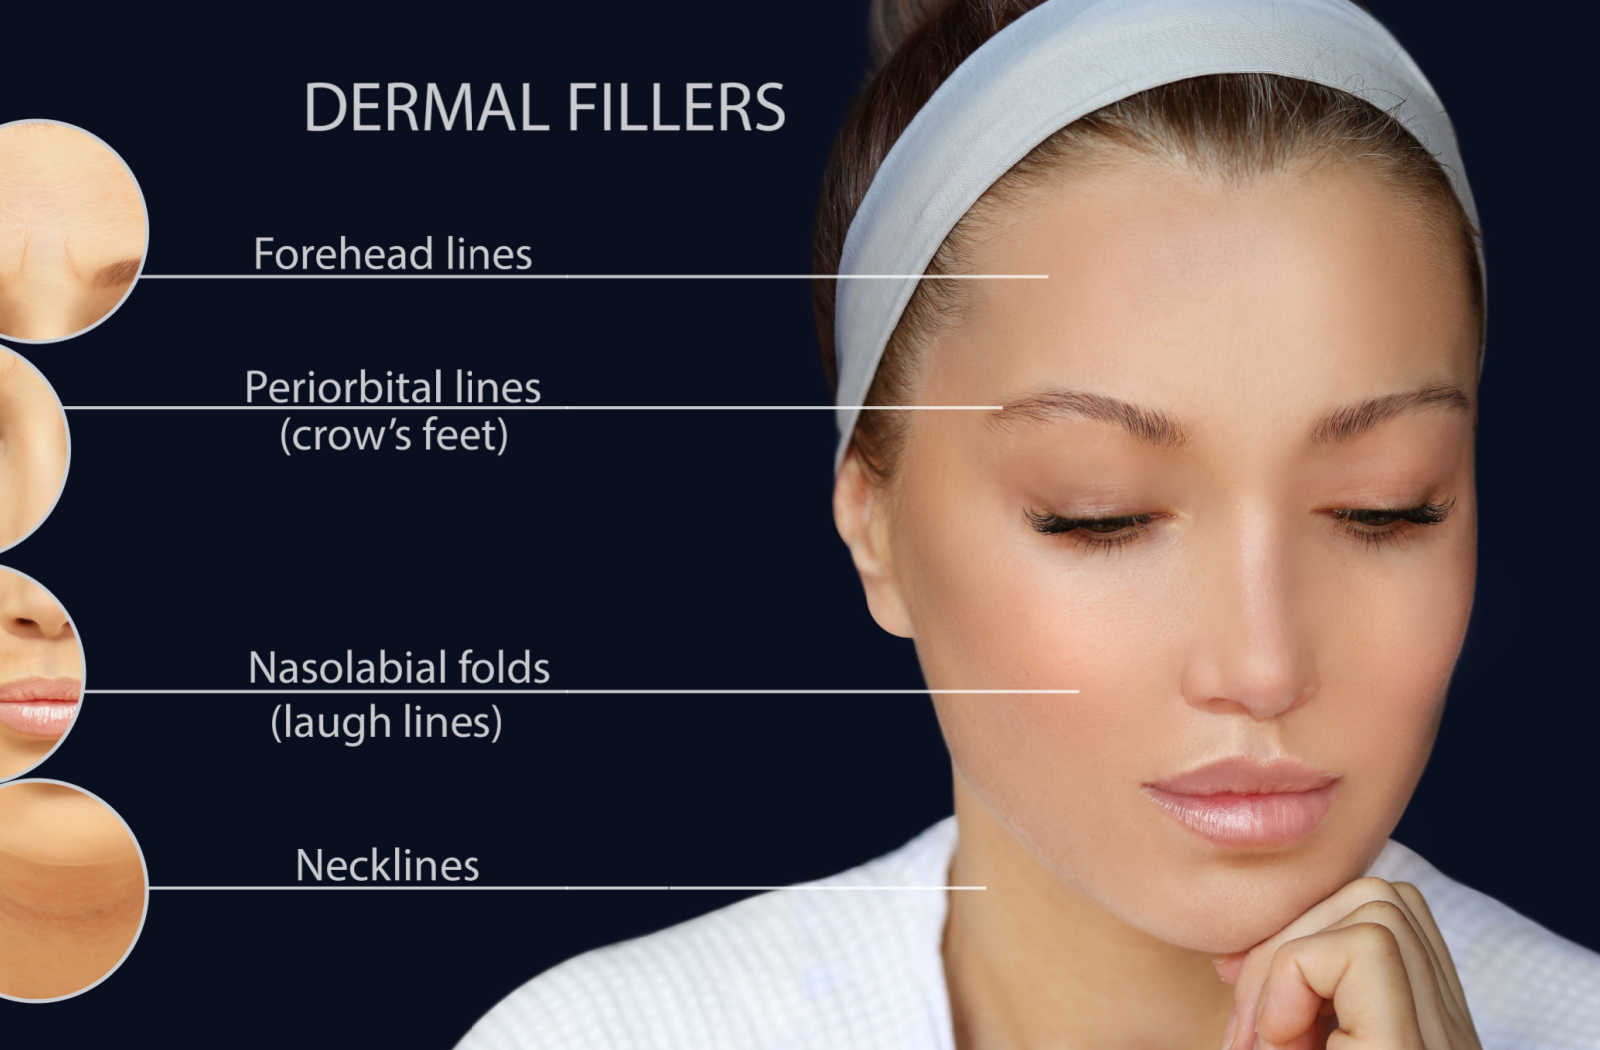 Image showing the areas that dermal fillers can target.